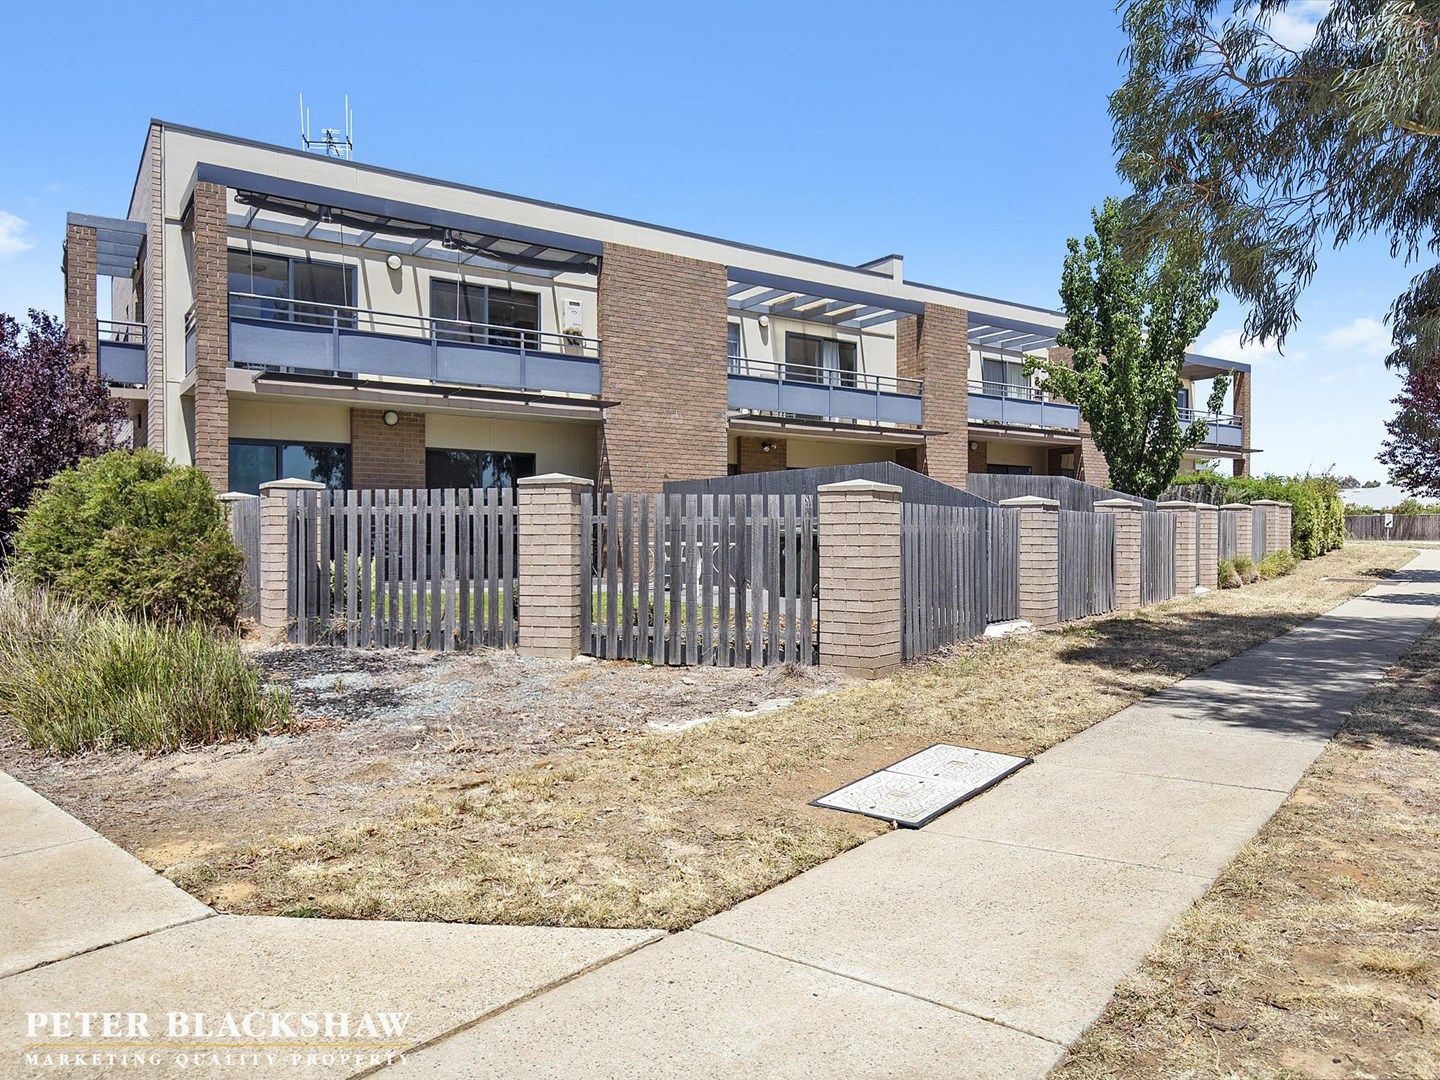 8/4 Jeff Snell Street, Dunlop ACT 2615, Image 0